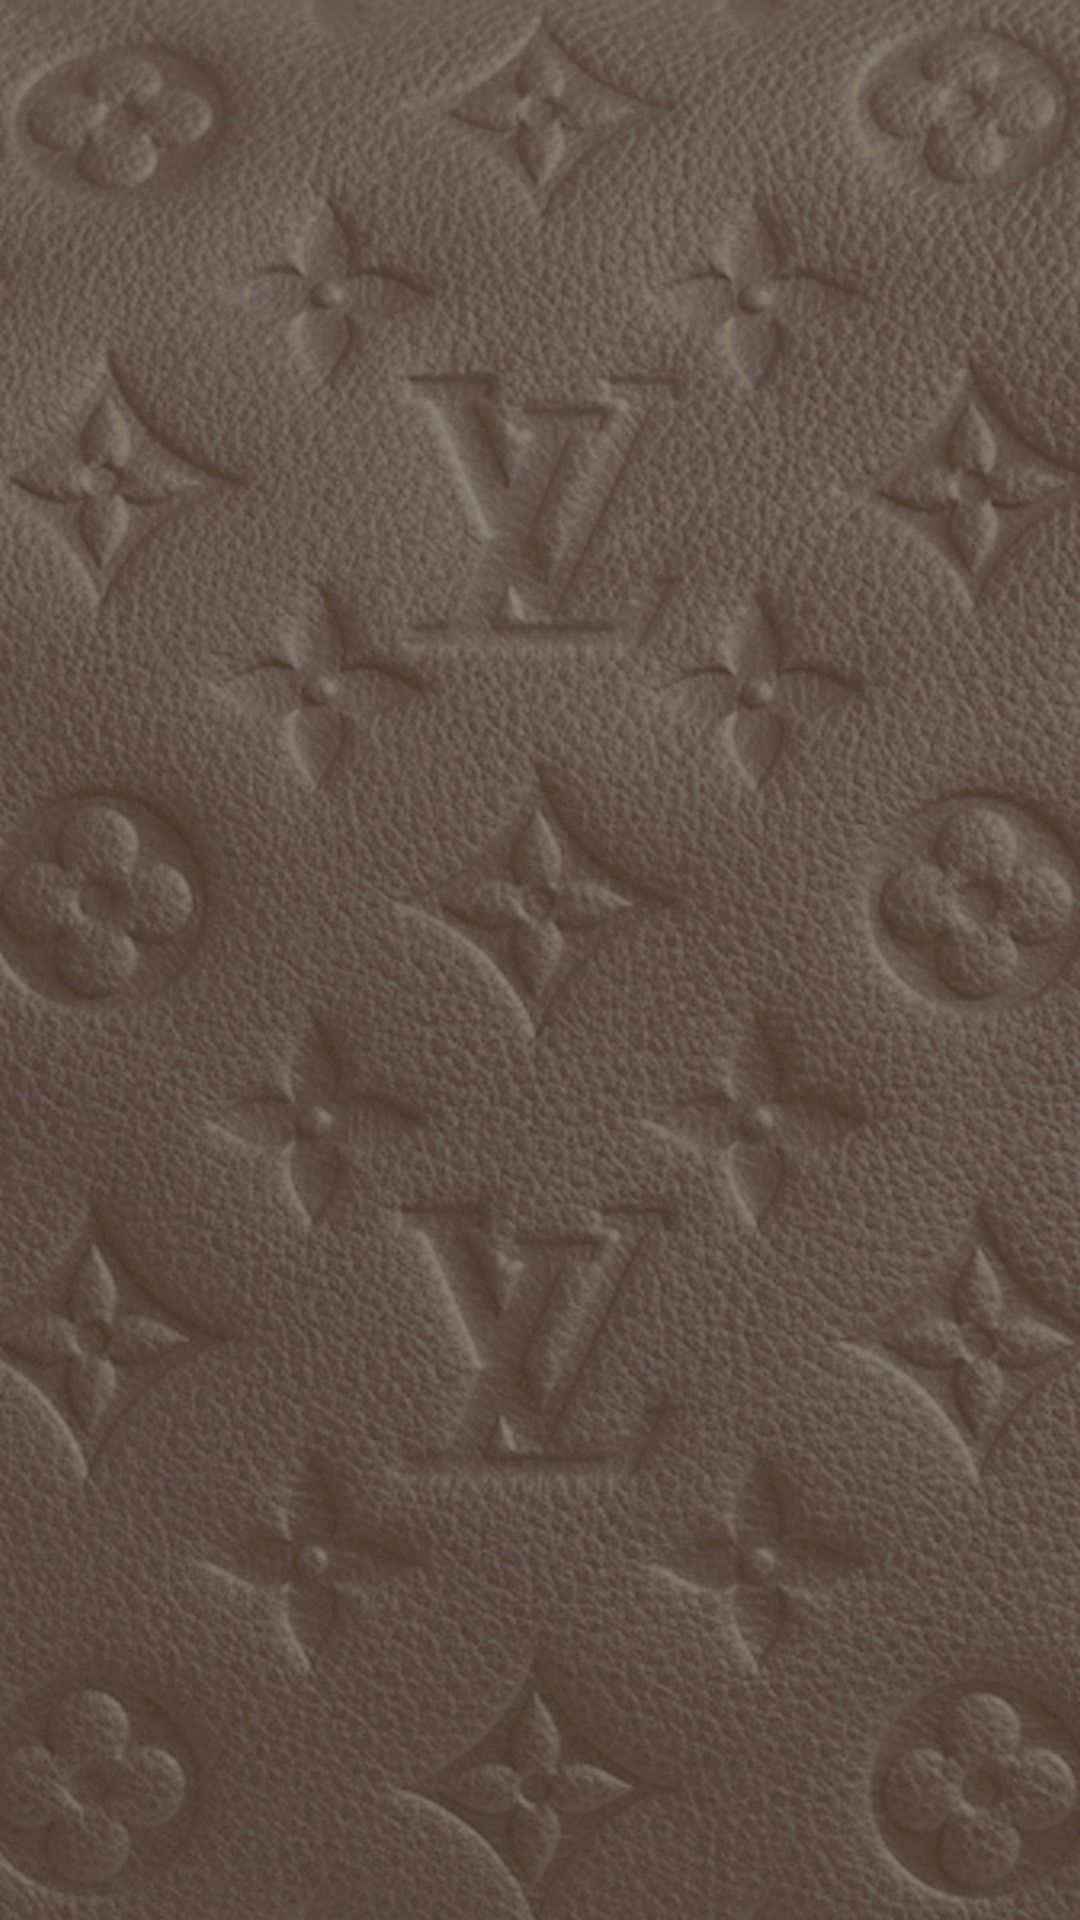 LV iPhone X Wallpapers - Wallpaper Cave